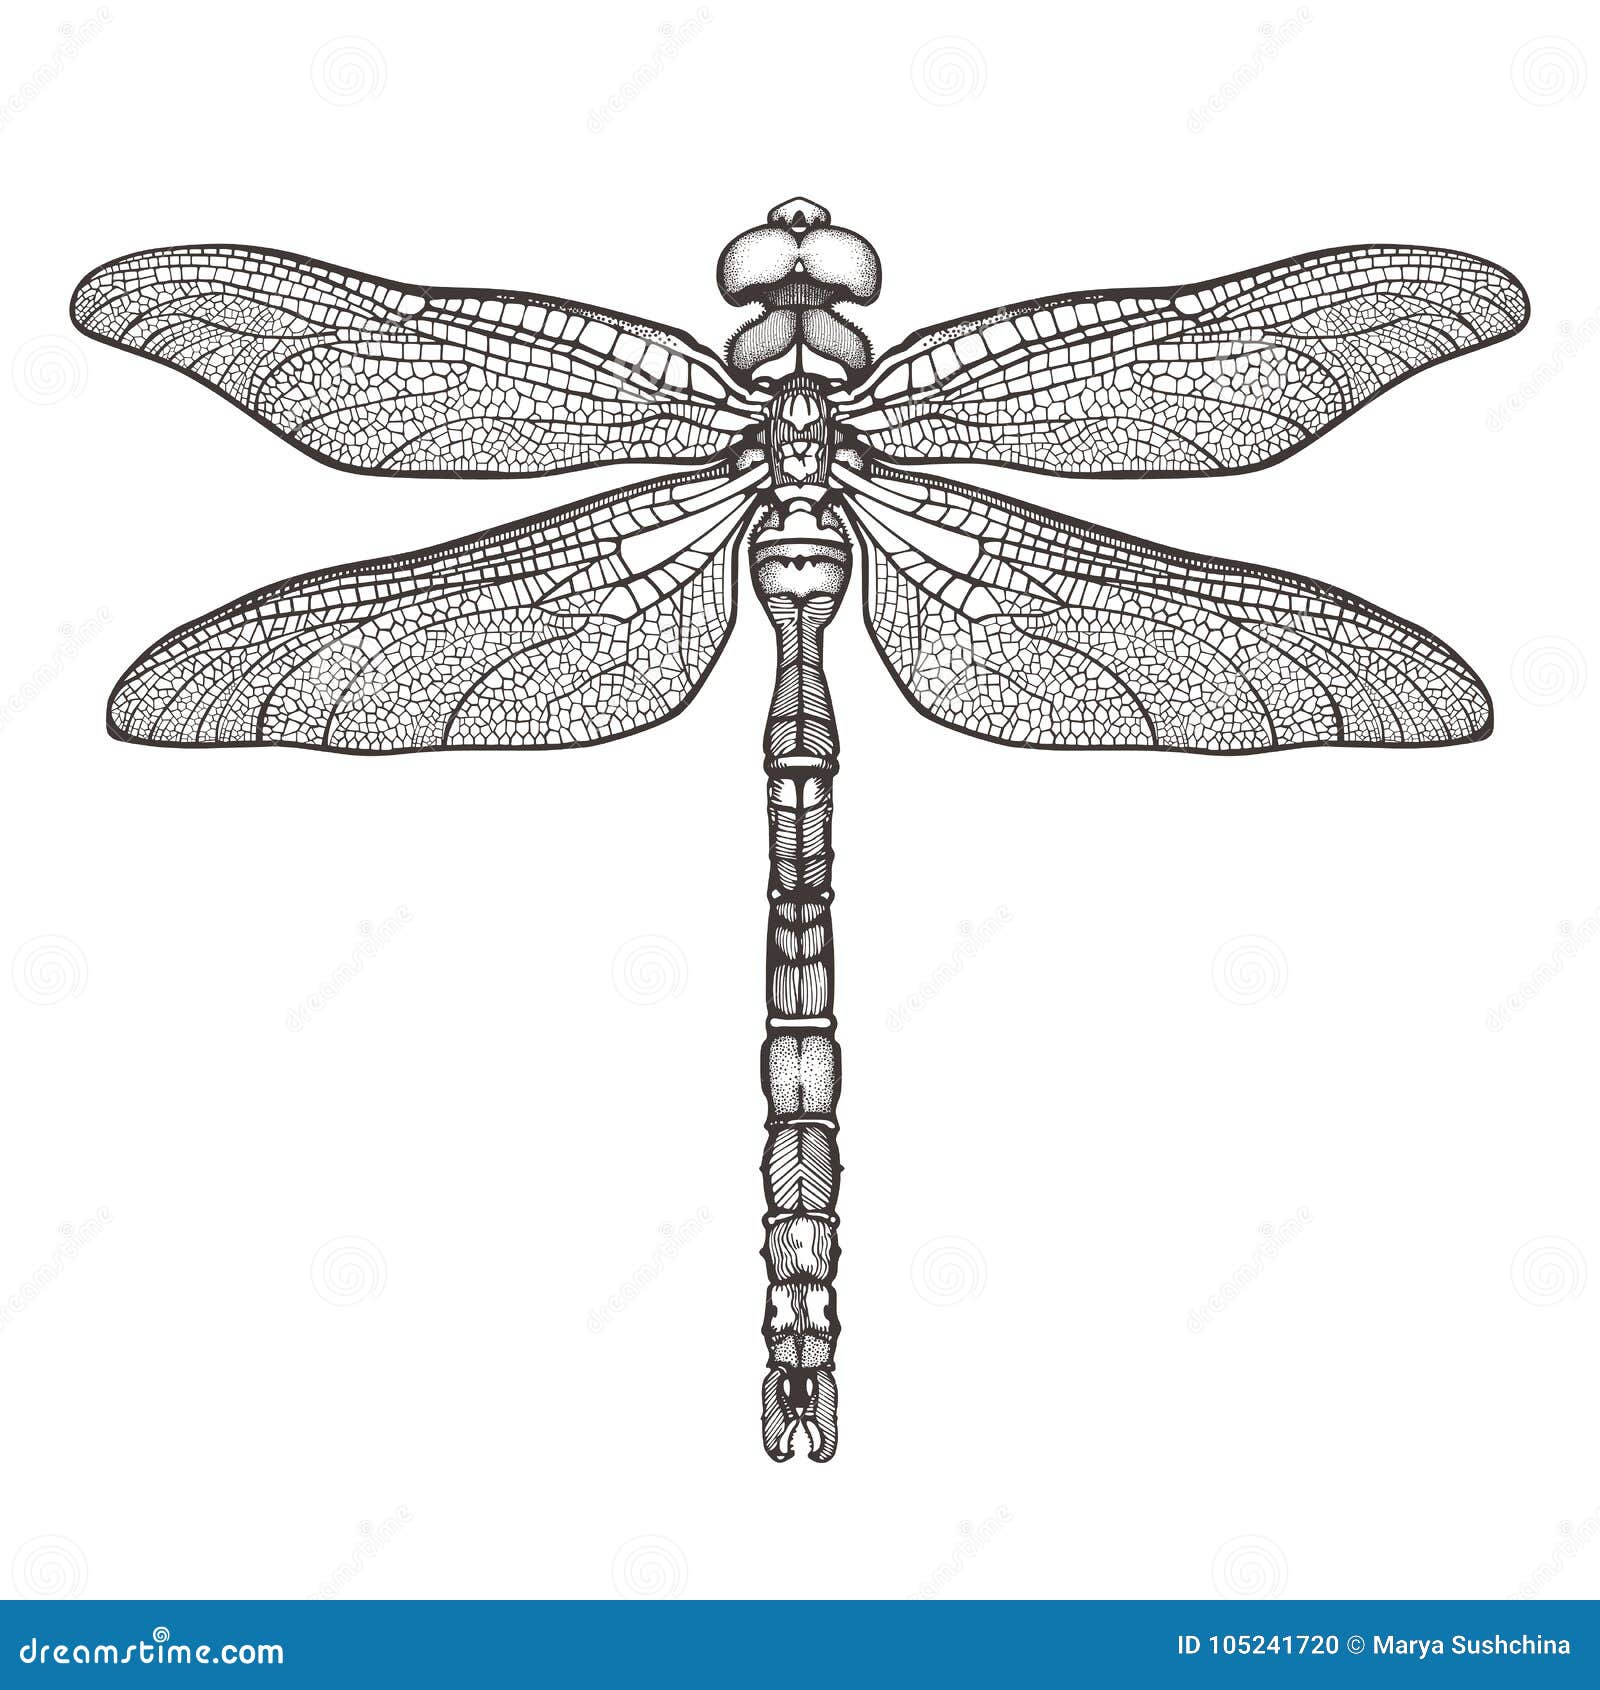 Black Dragonfly Aeschna Viridls, Isolated On White Background. Dragonfly Tattoo Sketch. Coloring ...